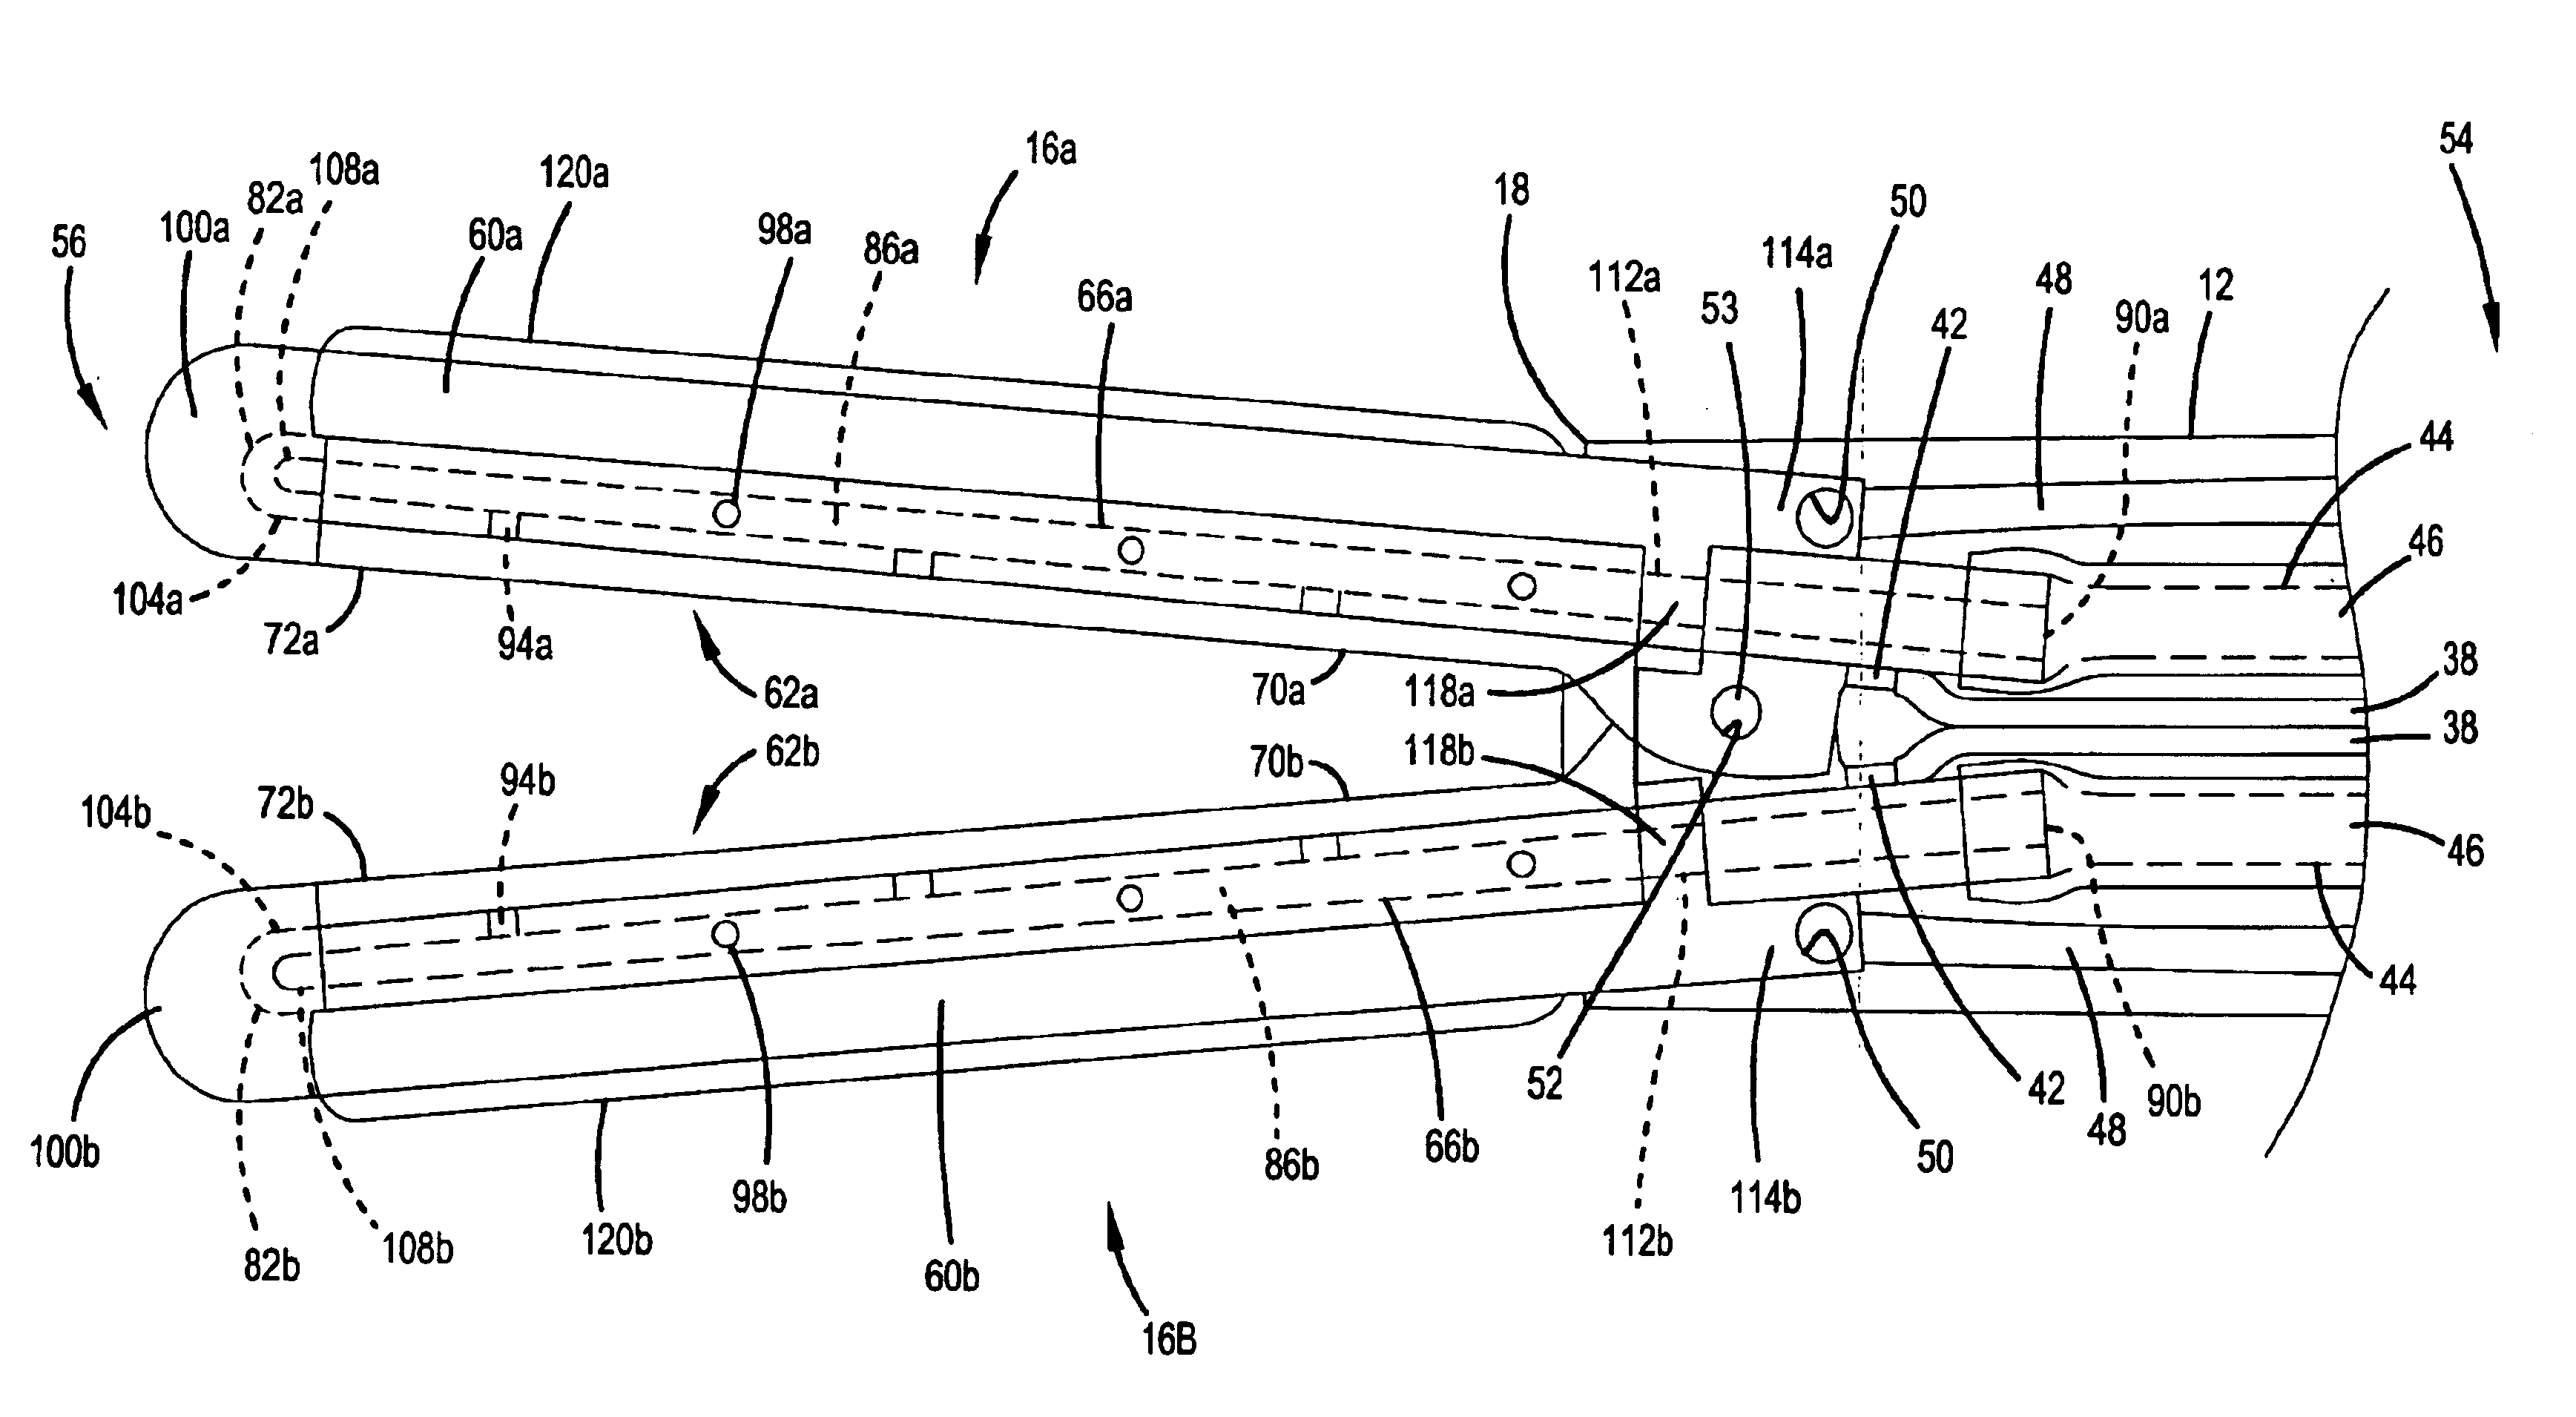 Fluid-assisted medical devices, systems and methods